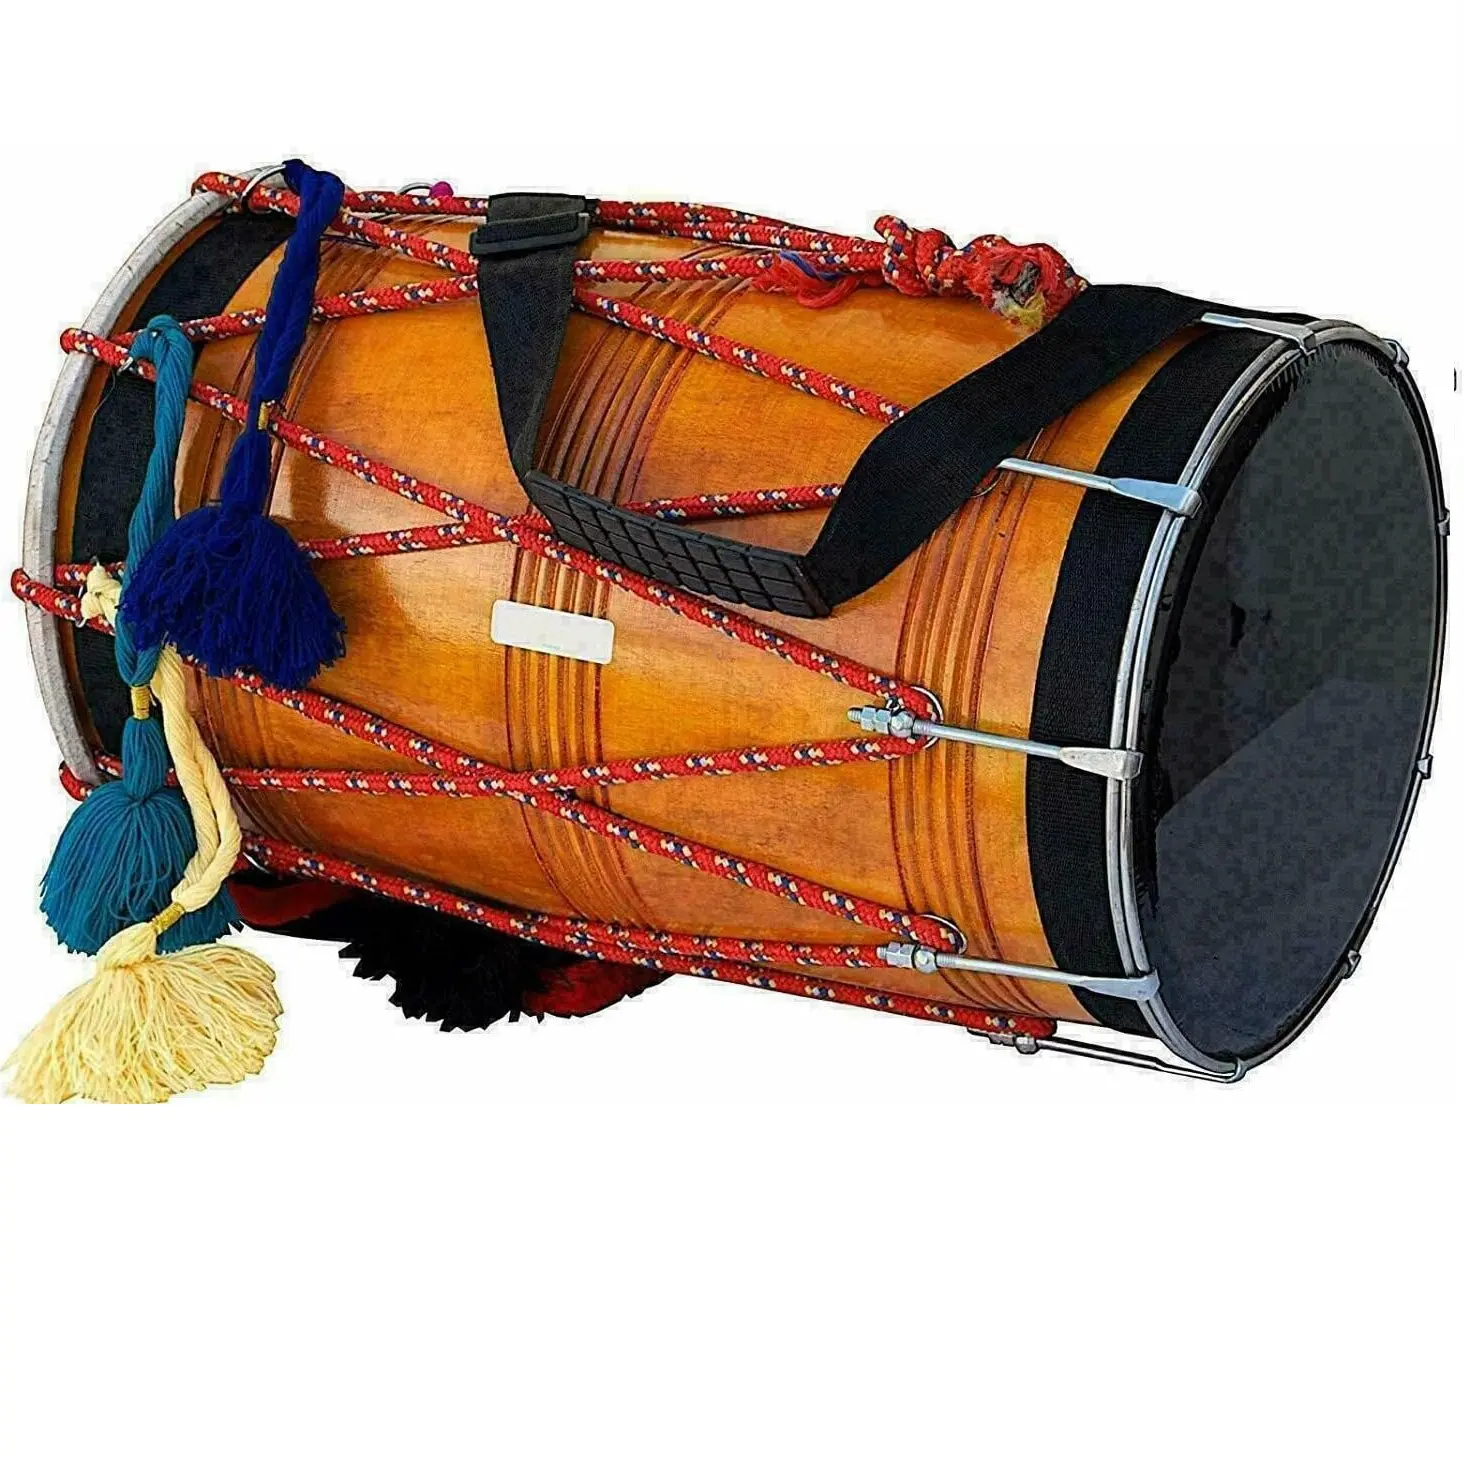 Wholesale Naal Dholak Wooden Dholak Indian Handcrafted wholesale Wooden Dholki Musical Drums Sheep Skin Indian Wholesale Price